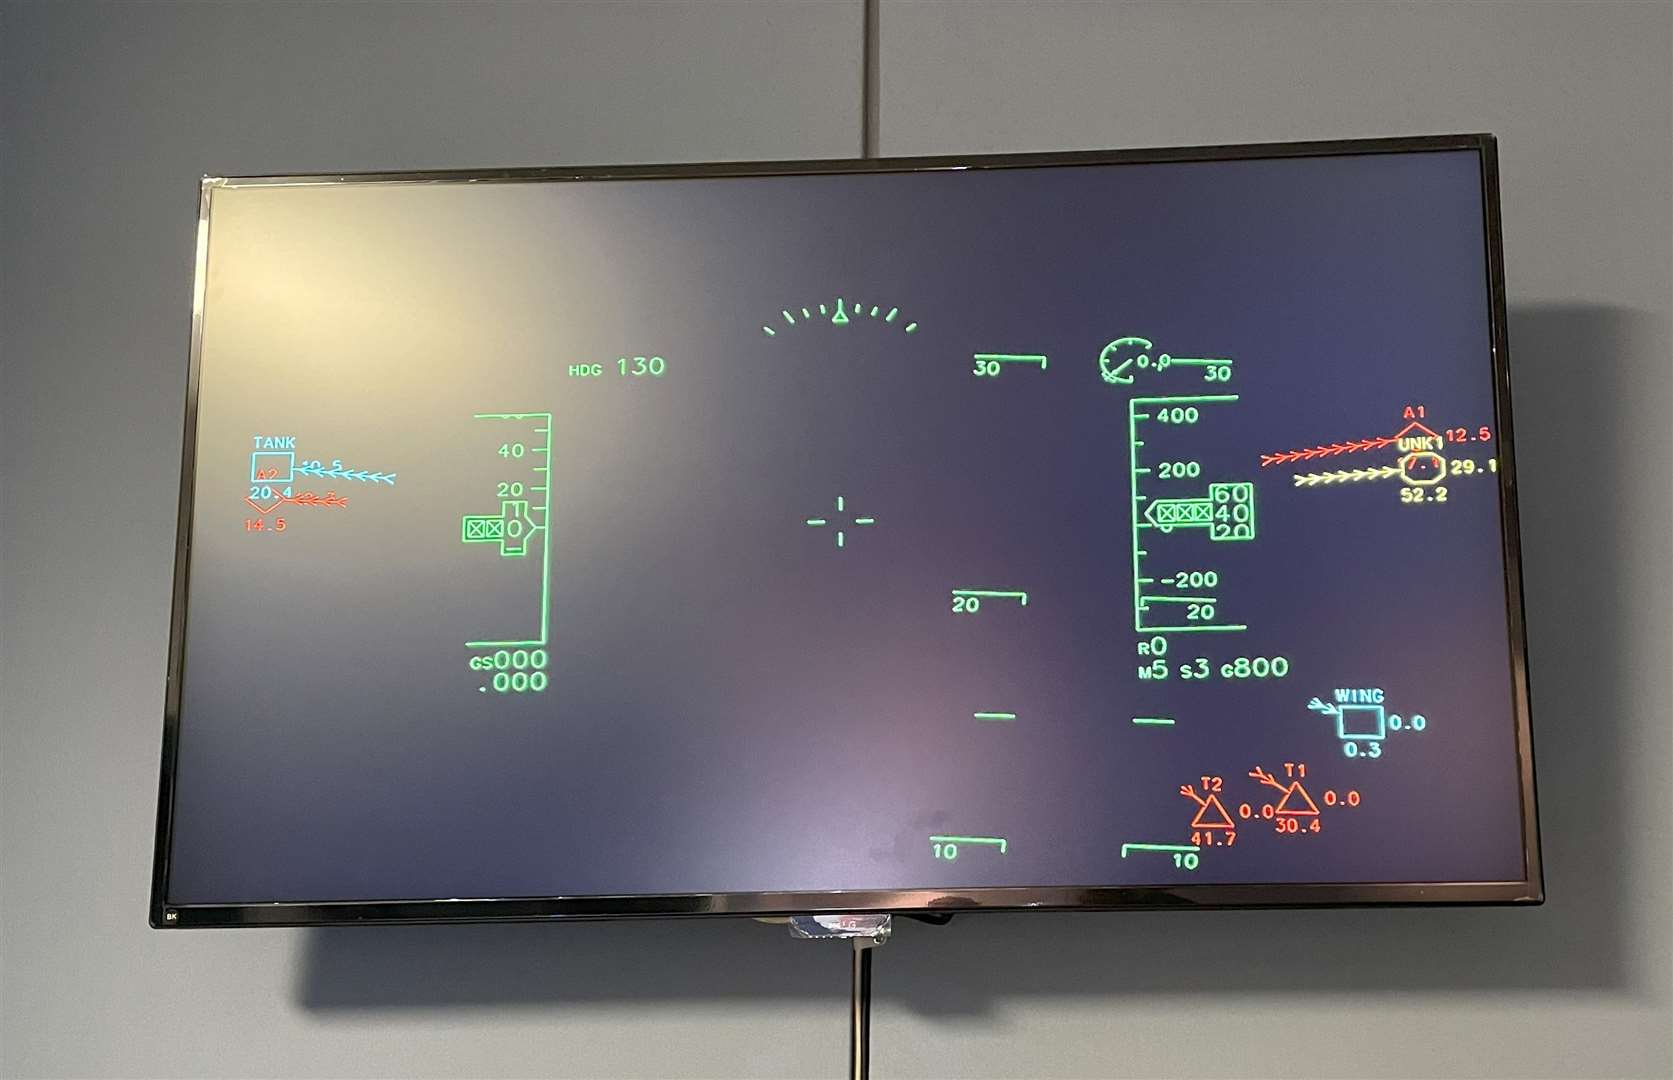 This is what the HUD and helmet project for the pilot but without the black screen which is instead the surroundings of the aircraft